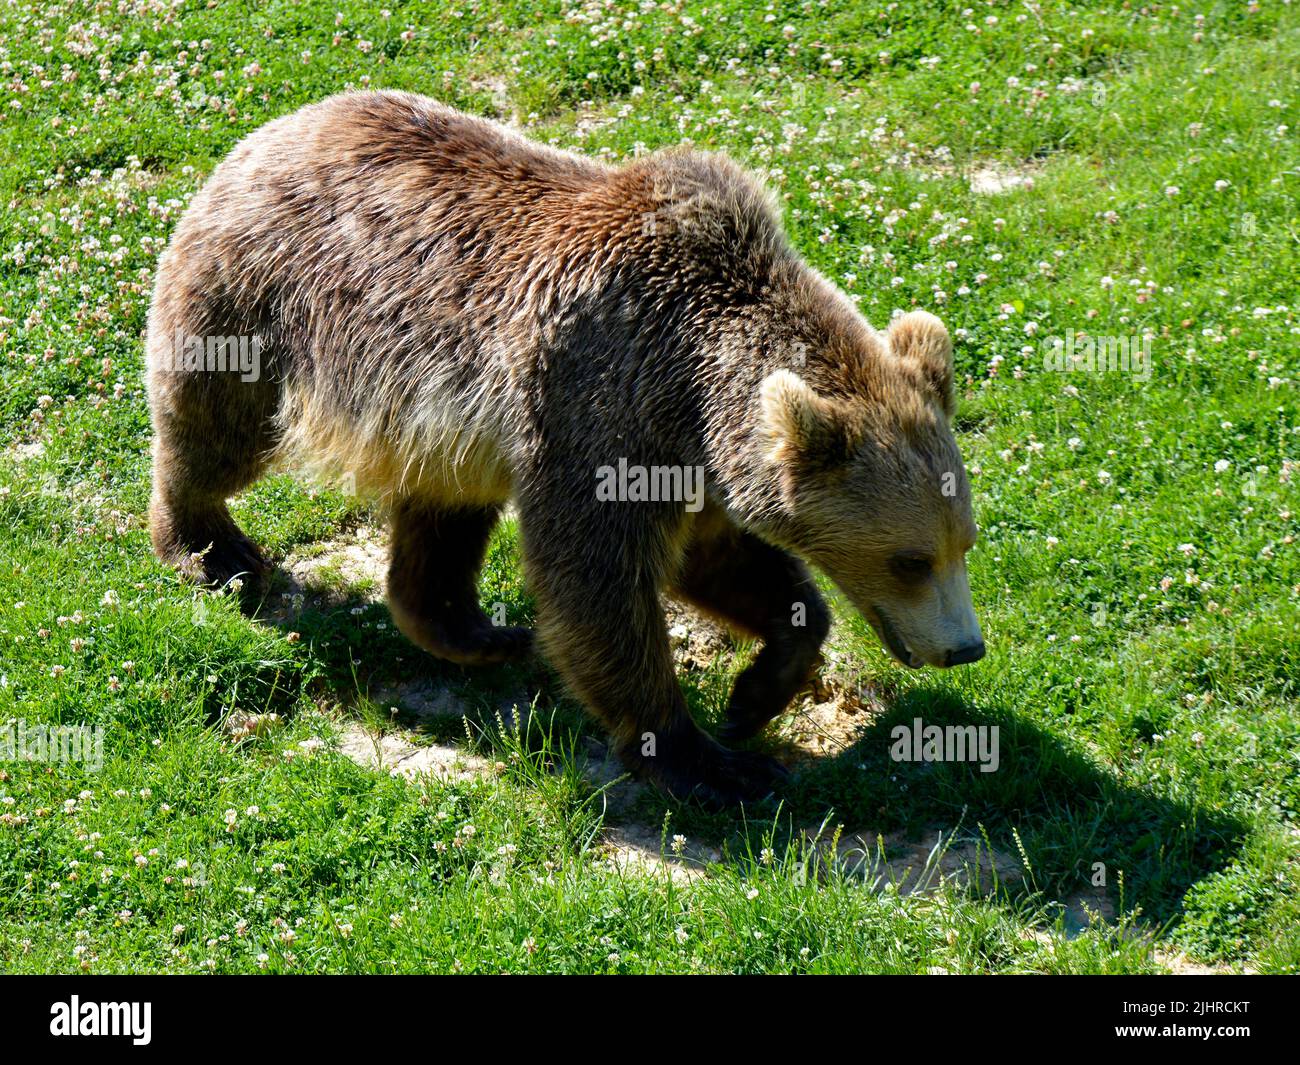 Brown bear (Ursus arctos) walking on grass and seen from above Stock Photo